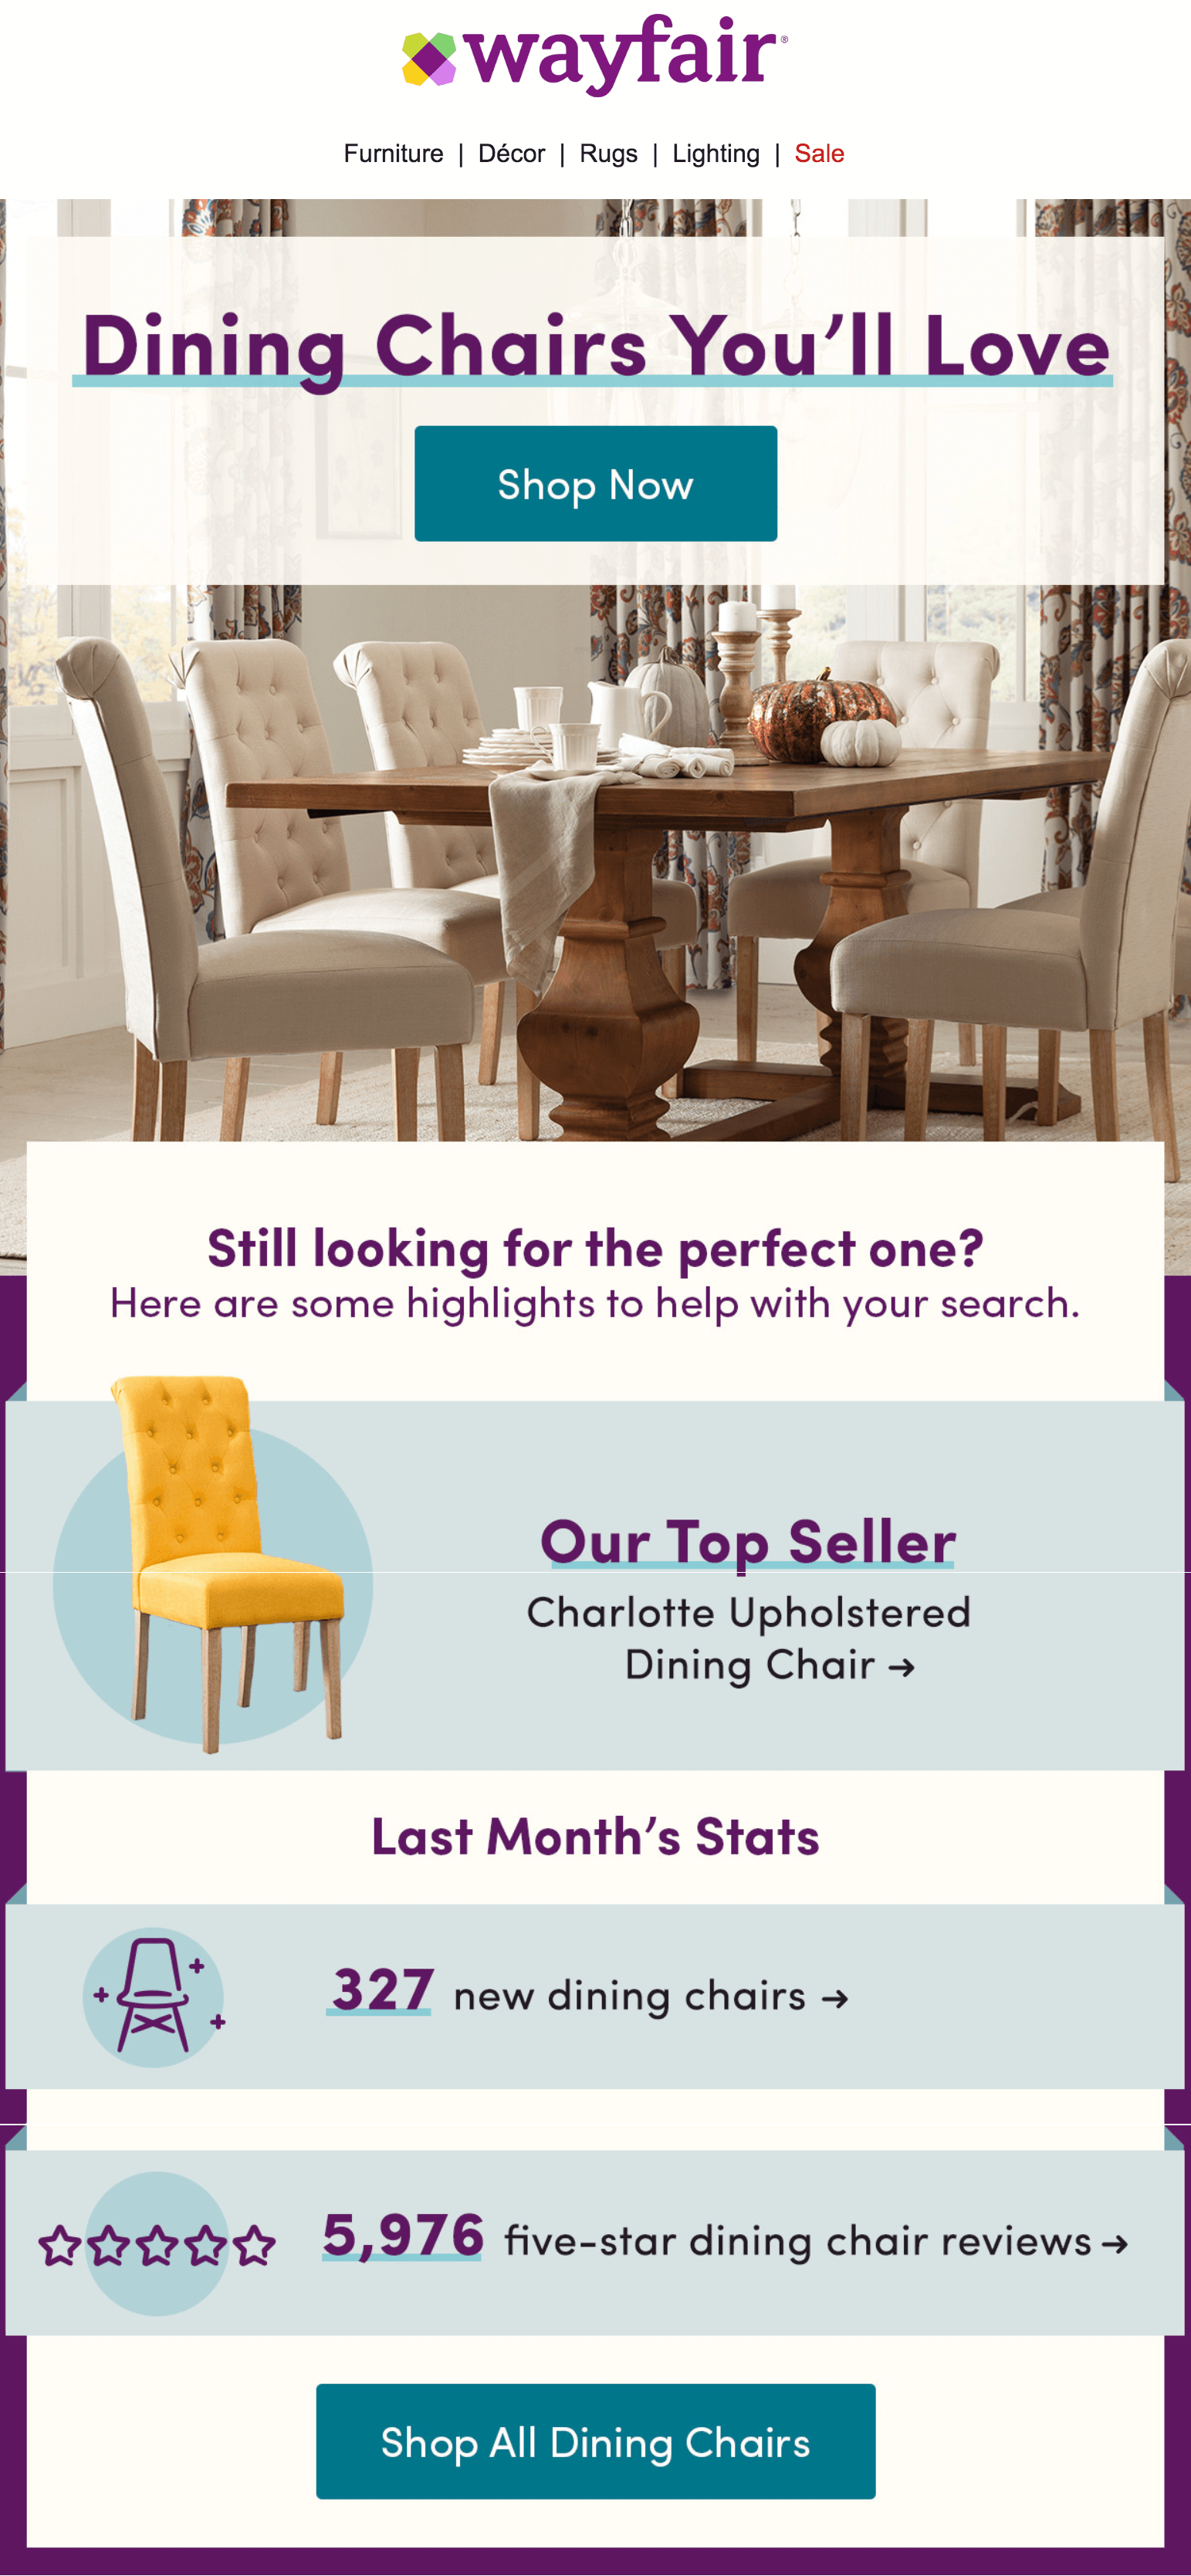 Segment your leads by behavior, as Wayfair does in this dining chairs email.